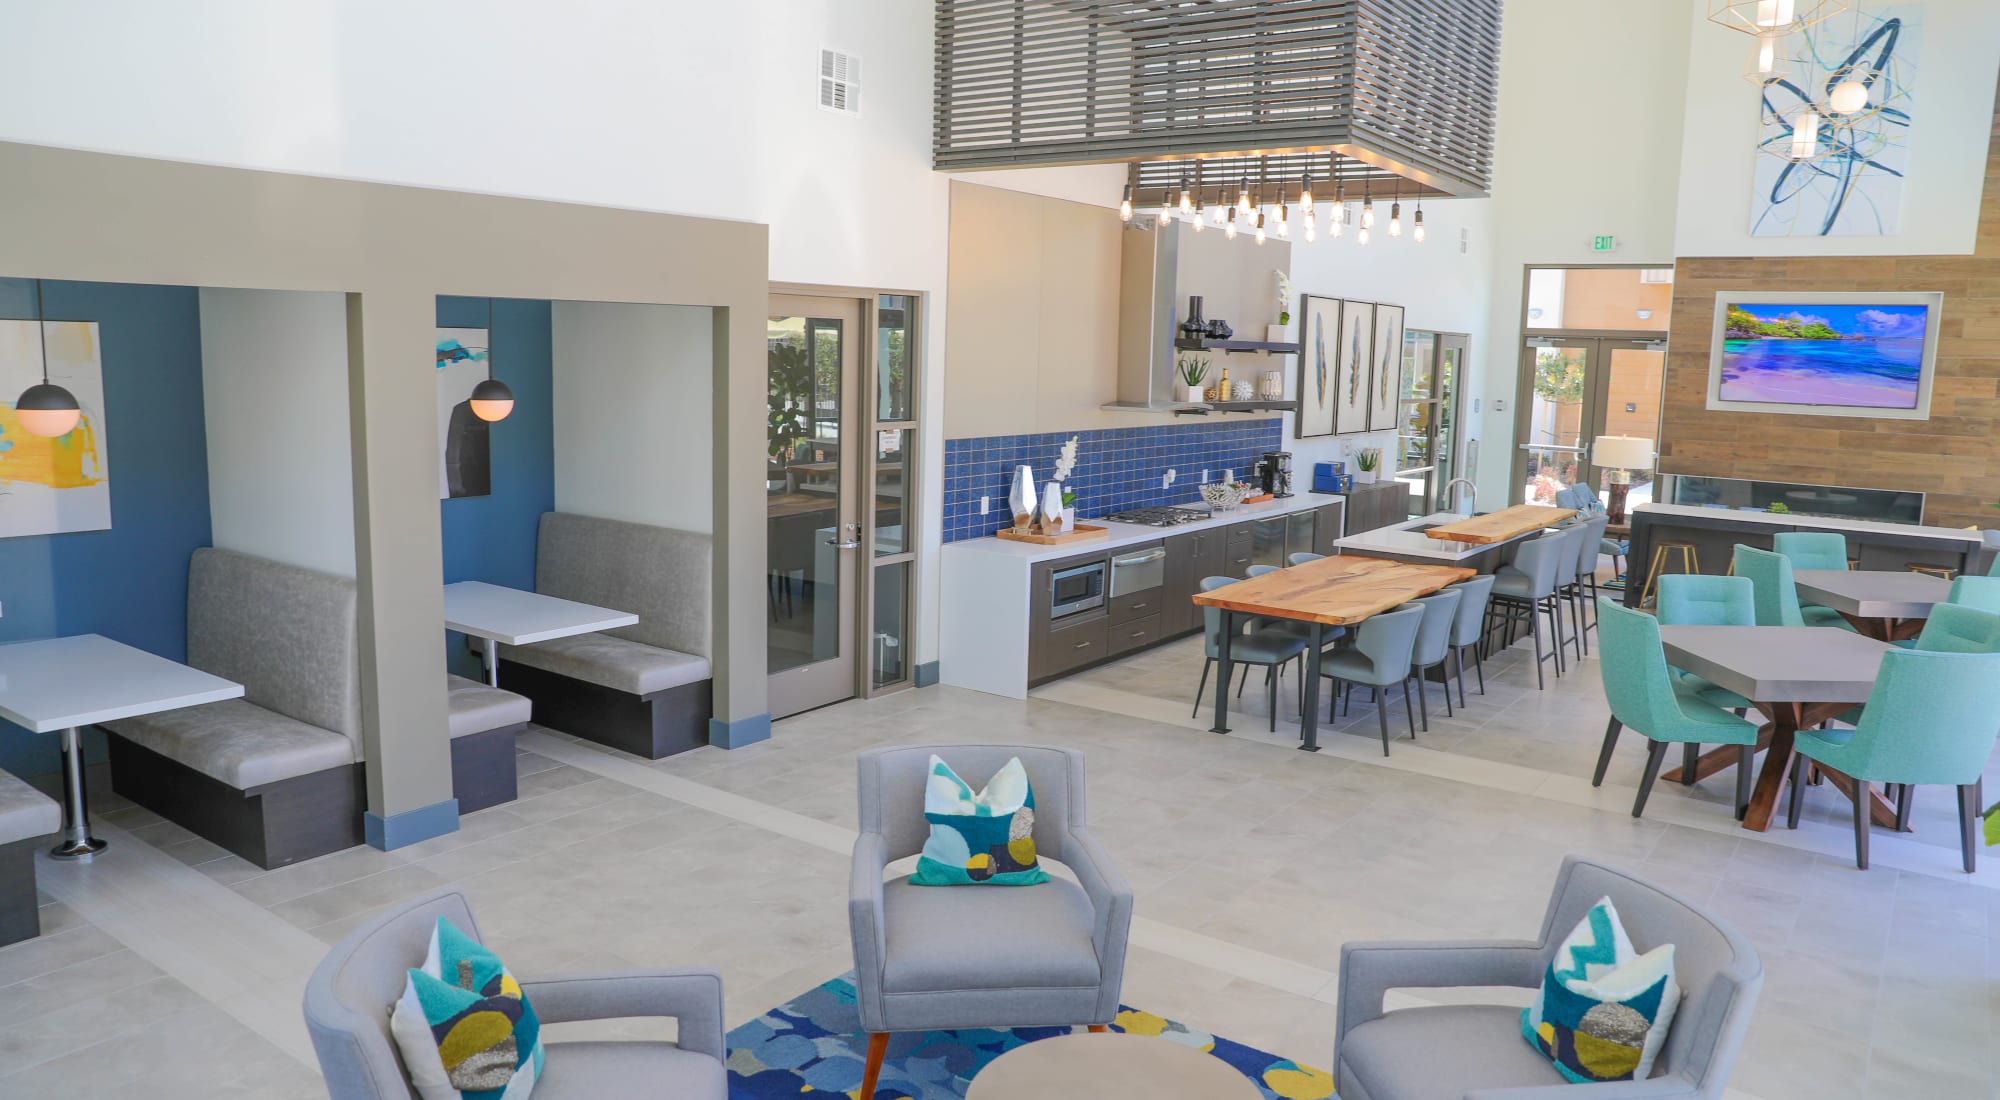 Clubhouse restaurant at Sutter Green Apartments in Sacramento, California